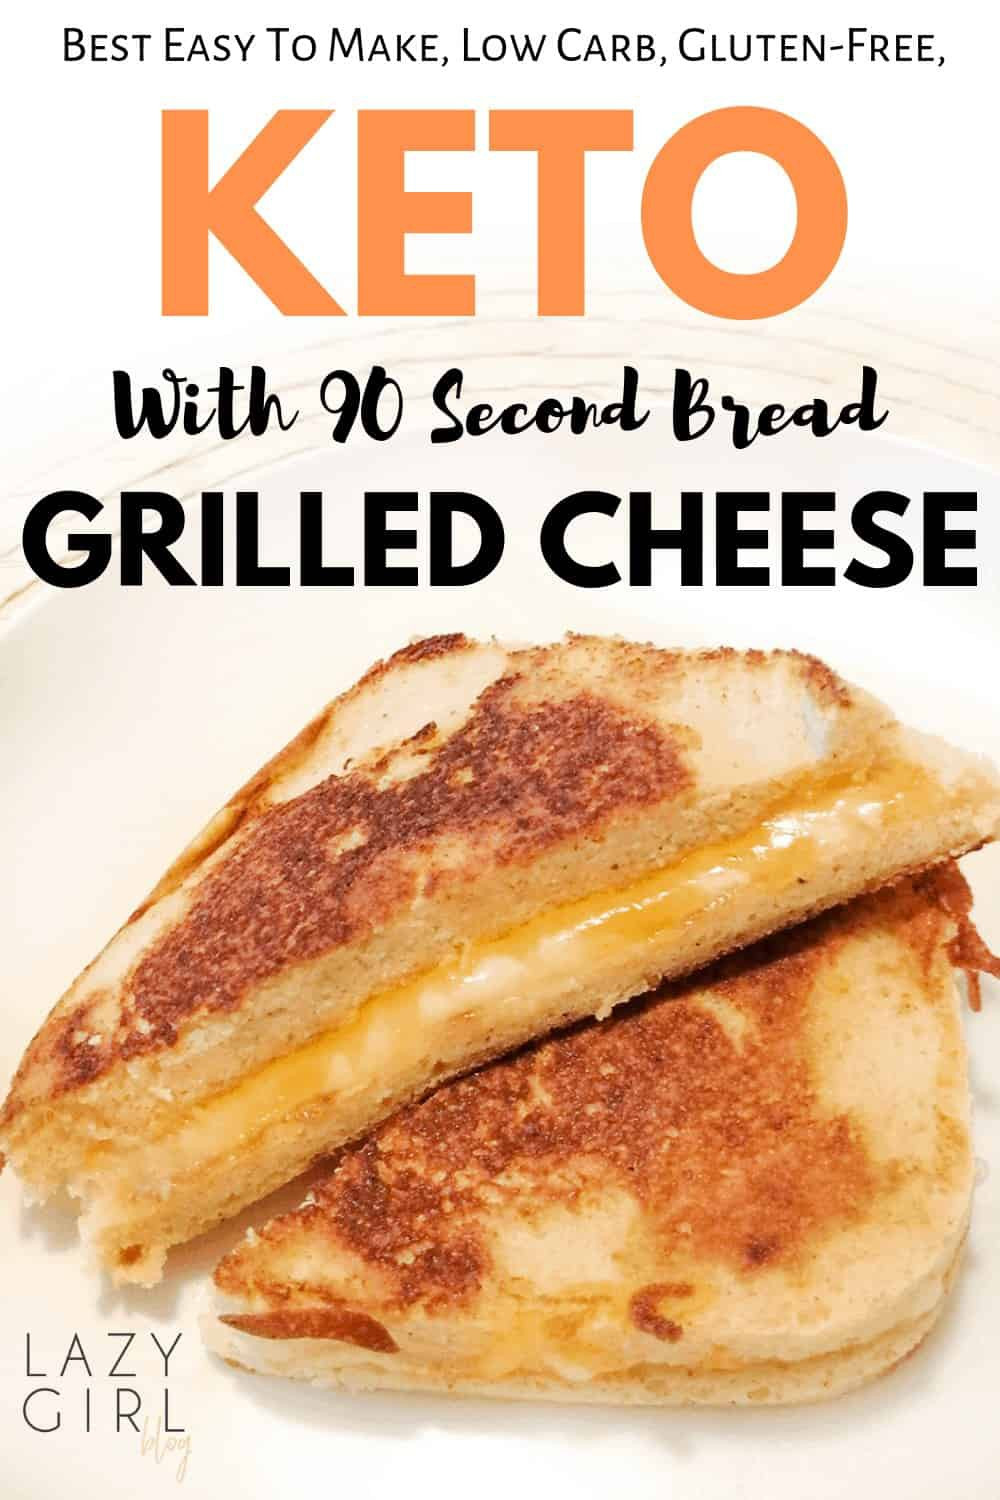 3 Ingredient 90 Second Keto Bread
 Keto Grilled Cheese with 90 Second Bread mimi